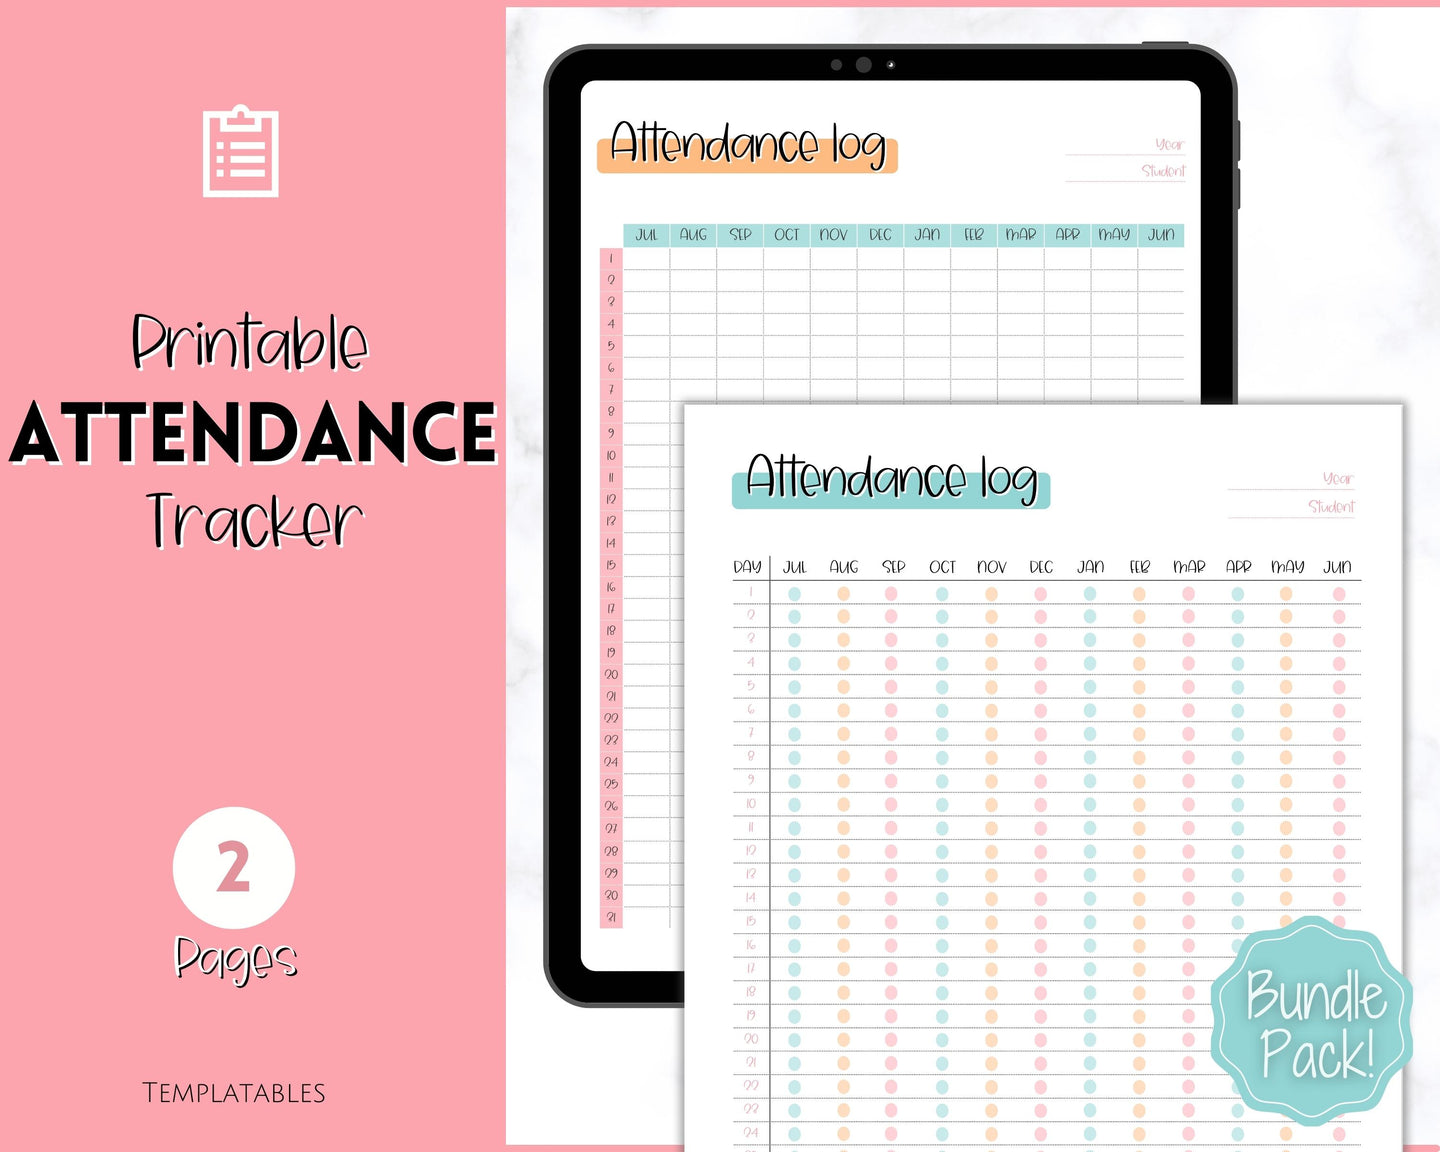 Attendance Tracker Sheet | Printable Attendance Record Log for Students | Colorful Sky